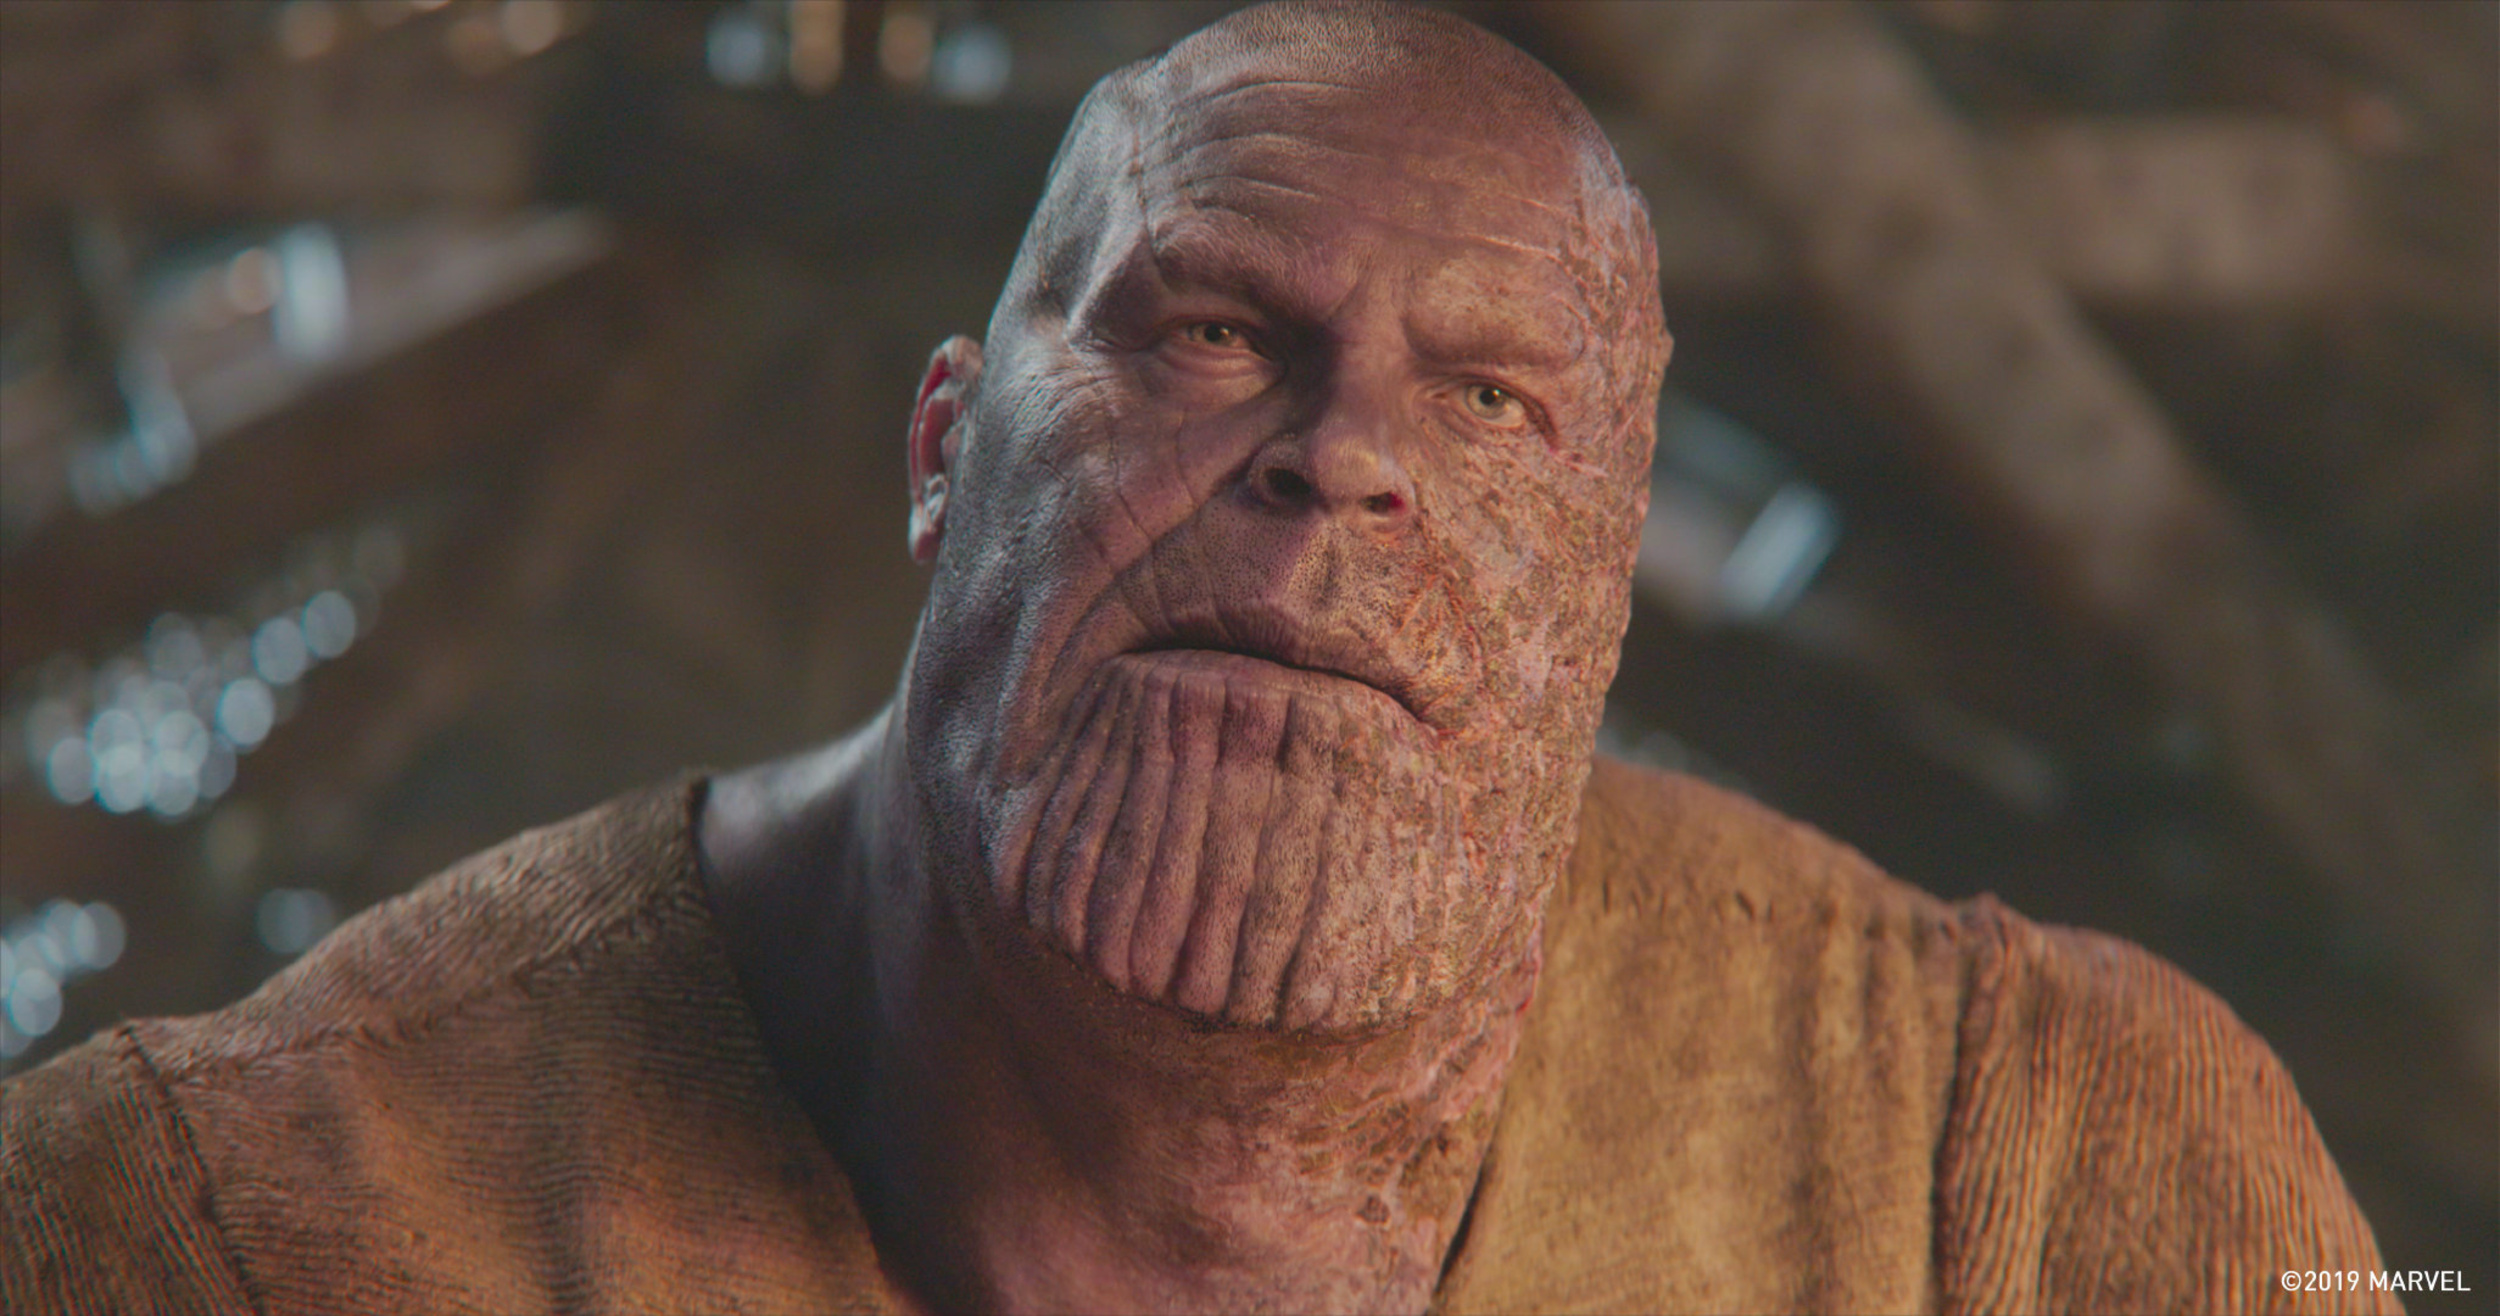 <p><em>Infinity War</em> and <em>Endgame</em> screenwriters Christopher Markus and Stephen McFeely considered Thanos the main character of the first of the two films, but with his mission complete, the writers struggled to figure out what to do with the older version of Thanos that succeeded in his quest. Then, producer Trinh Tran suggested that they kill Thanos off in the first act. That’s just what they did, though another version of Thanos plays a role in the film. To differentiate the two, the younger Thanos was called “Warrior Thanos” by the filmmakers.</p><p><a href='https://www.msn.com/en-us/community/channel/vid-cj9pqbr0vn9in2b6ddcd8sfgpfq6x6utp44fssrv6mc2gtybw0us'>Follow us on MSN to see more of our exclusive entertainment content.</a></p>